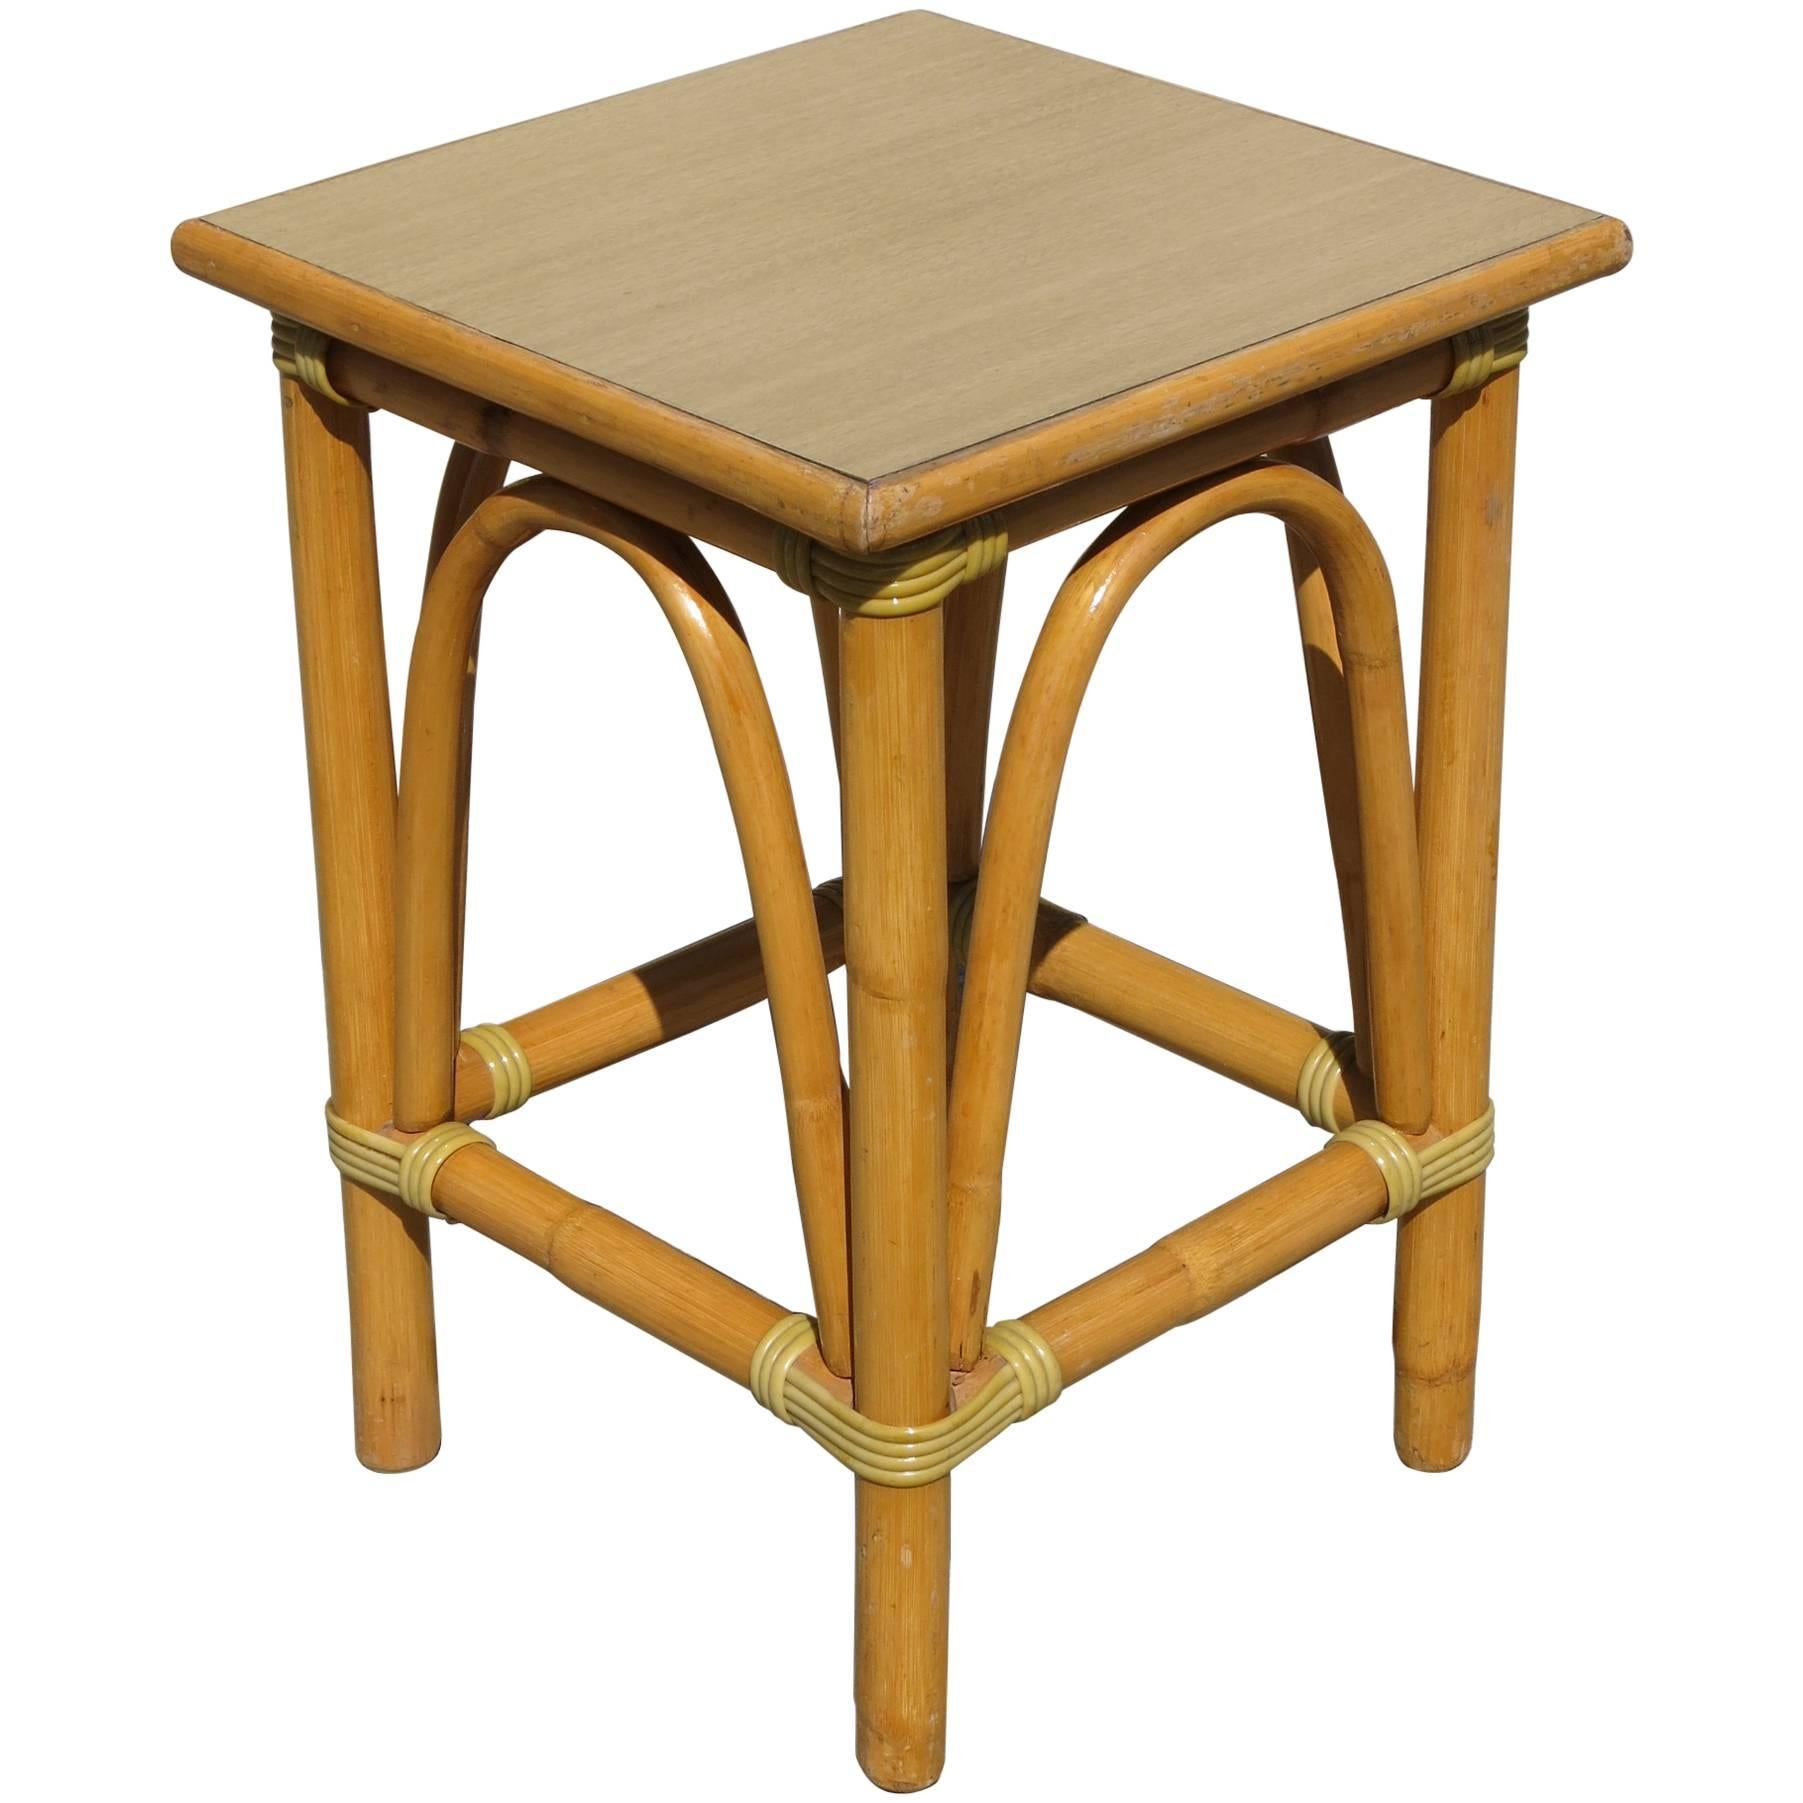 Restored Small Rattan Side Table with Arched Sides